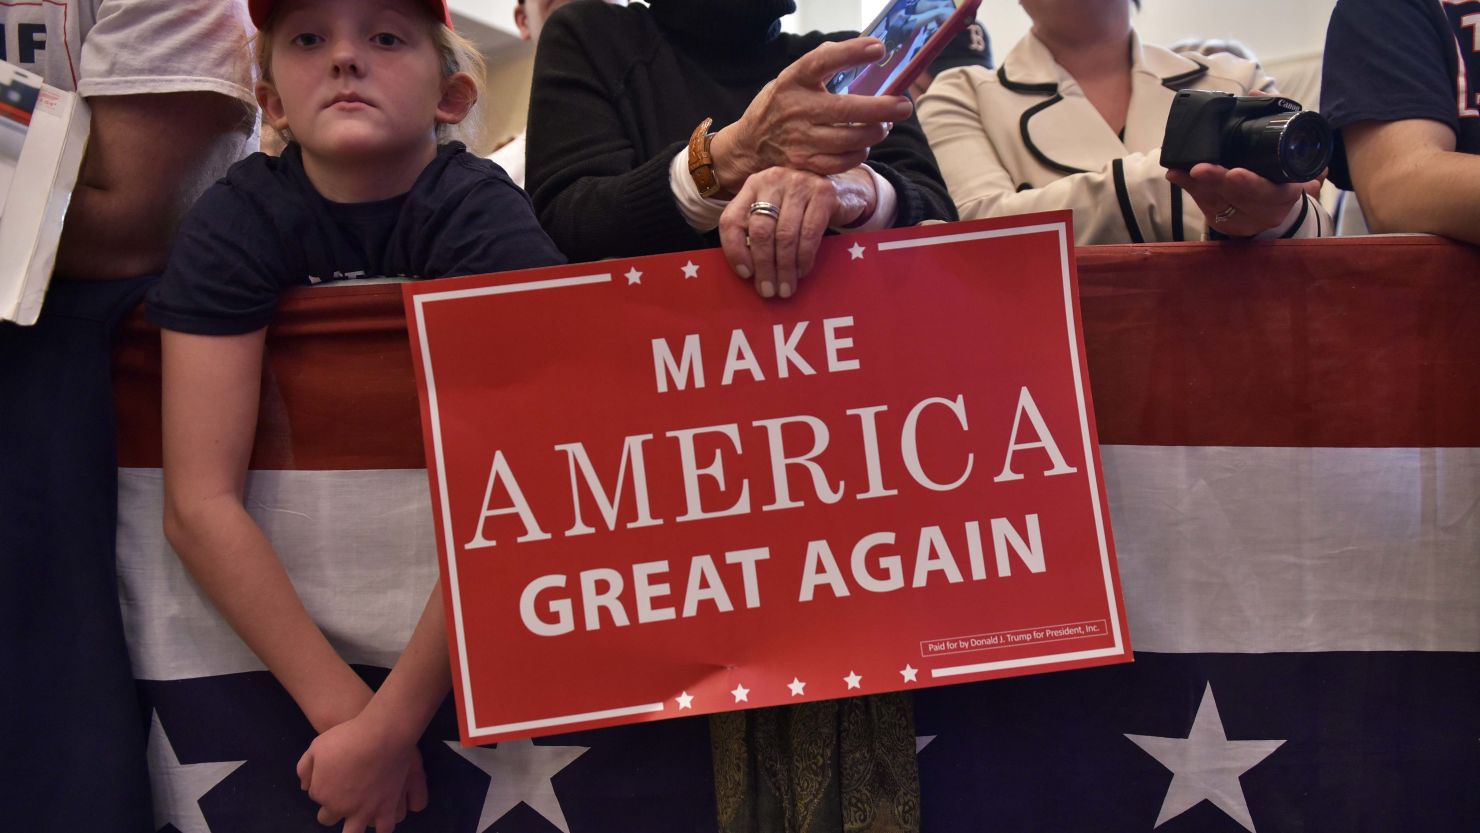 Supporters hold placards during a rally for US Republican presidential nominee Donald Trump at the Atkinson Country Club in Atkinson, New Hampshire on November 4, 2016. / AFP / MANDEL NGAN        (Photo credit should read MANDEL NGAN/AFP/Getty Images)